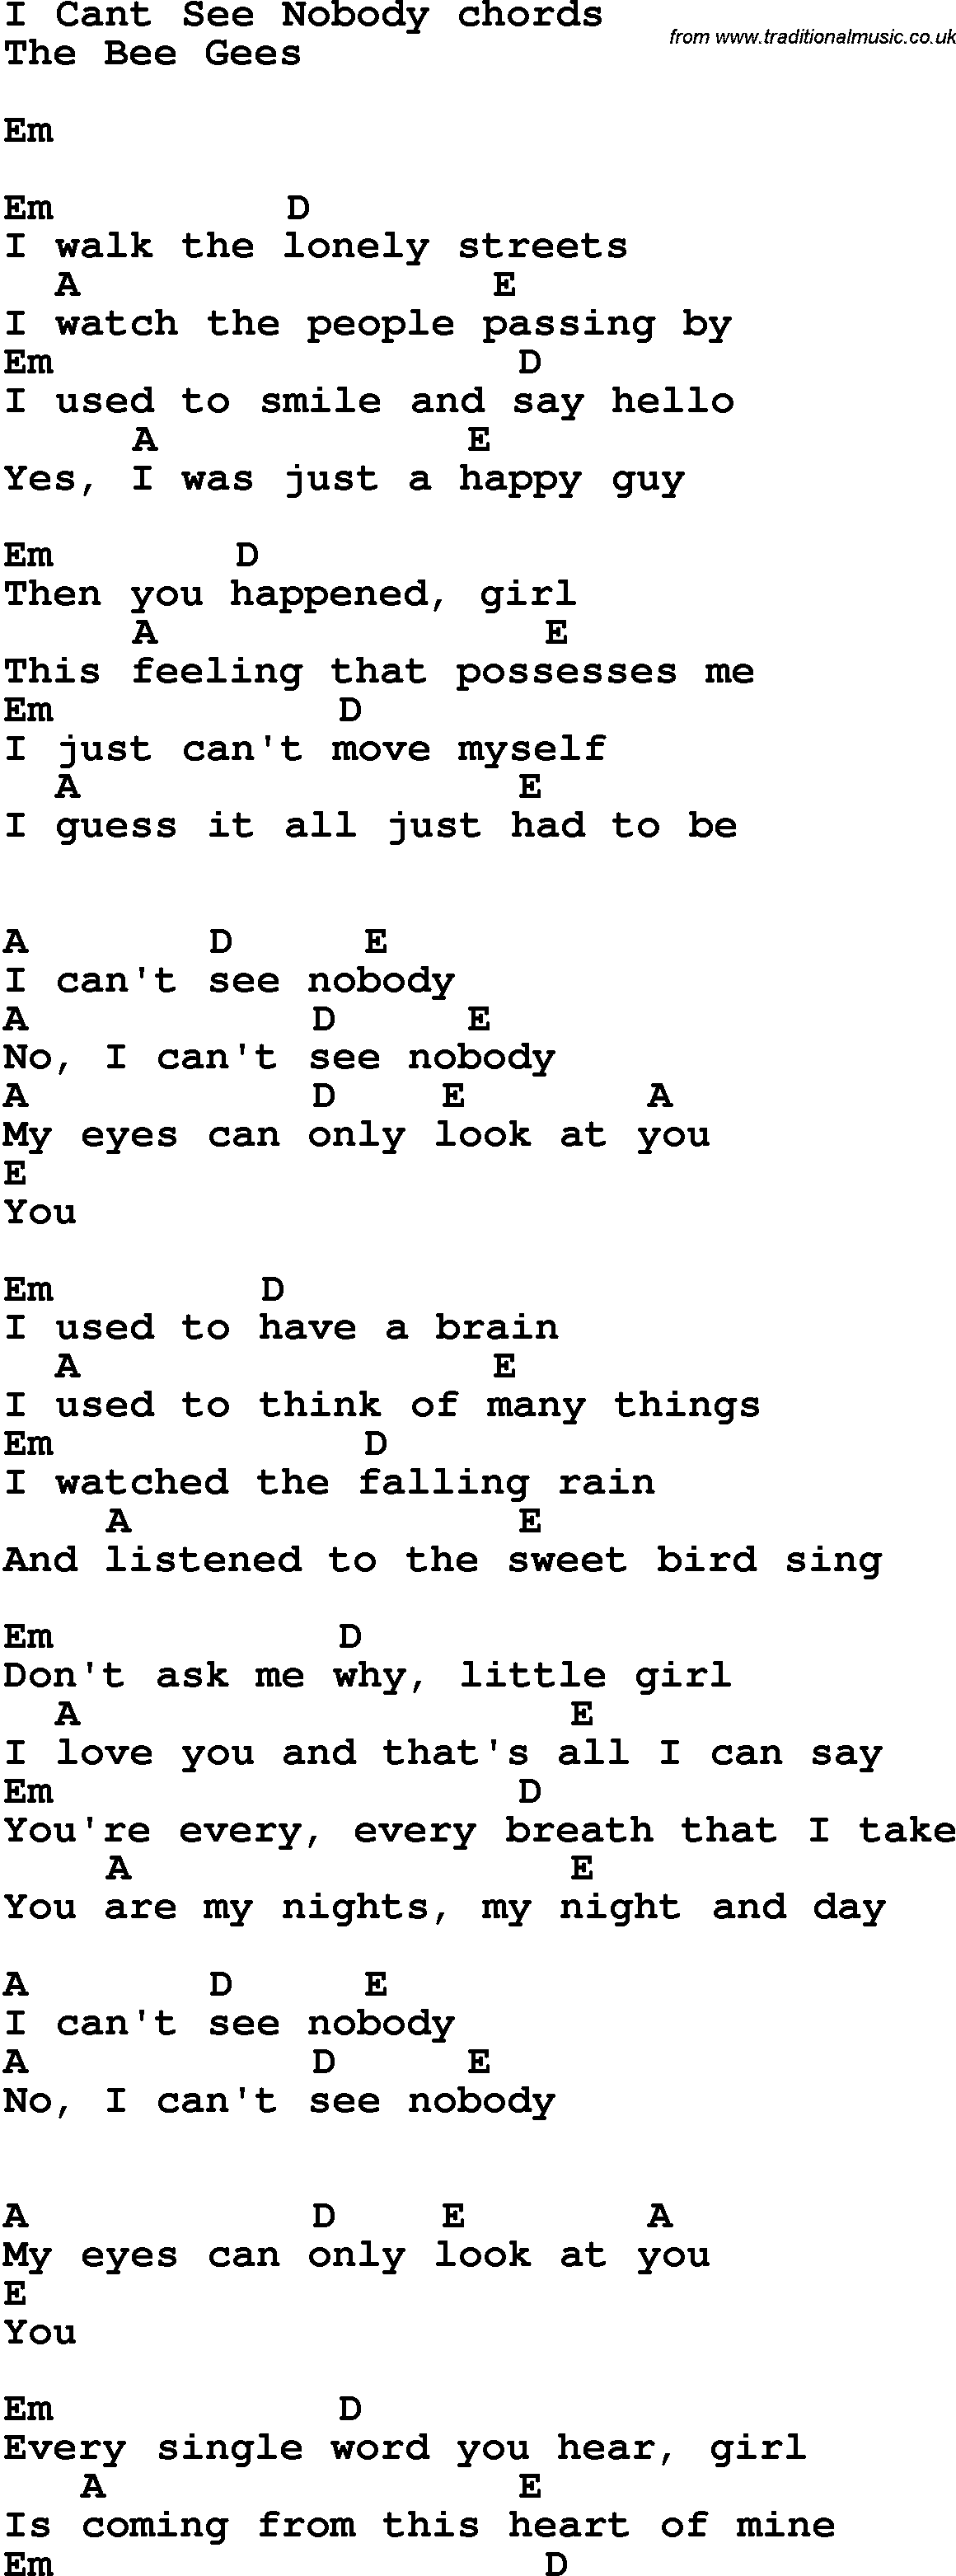 Song Lyrics with guitar chords for I Can't See Nobody